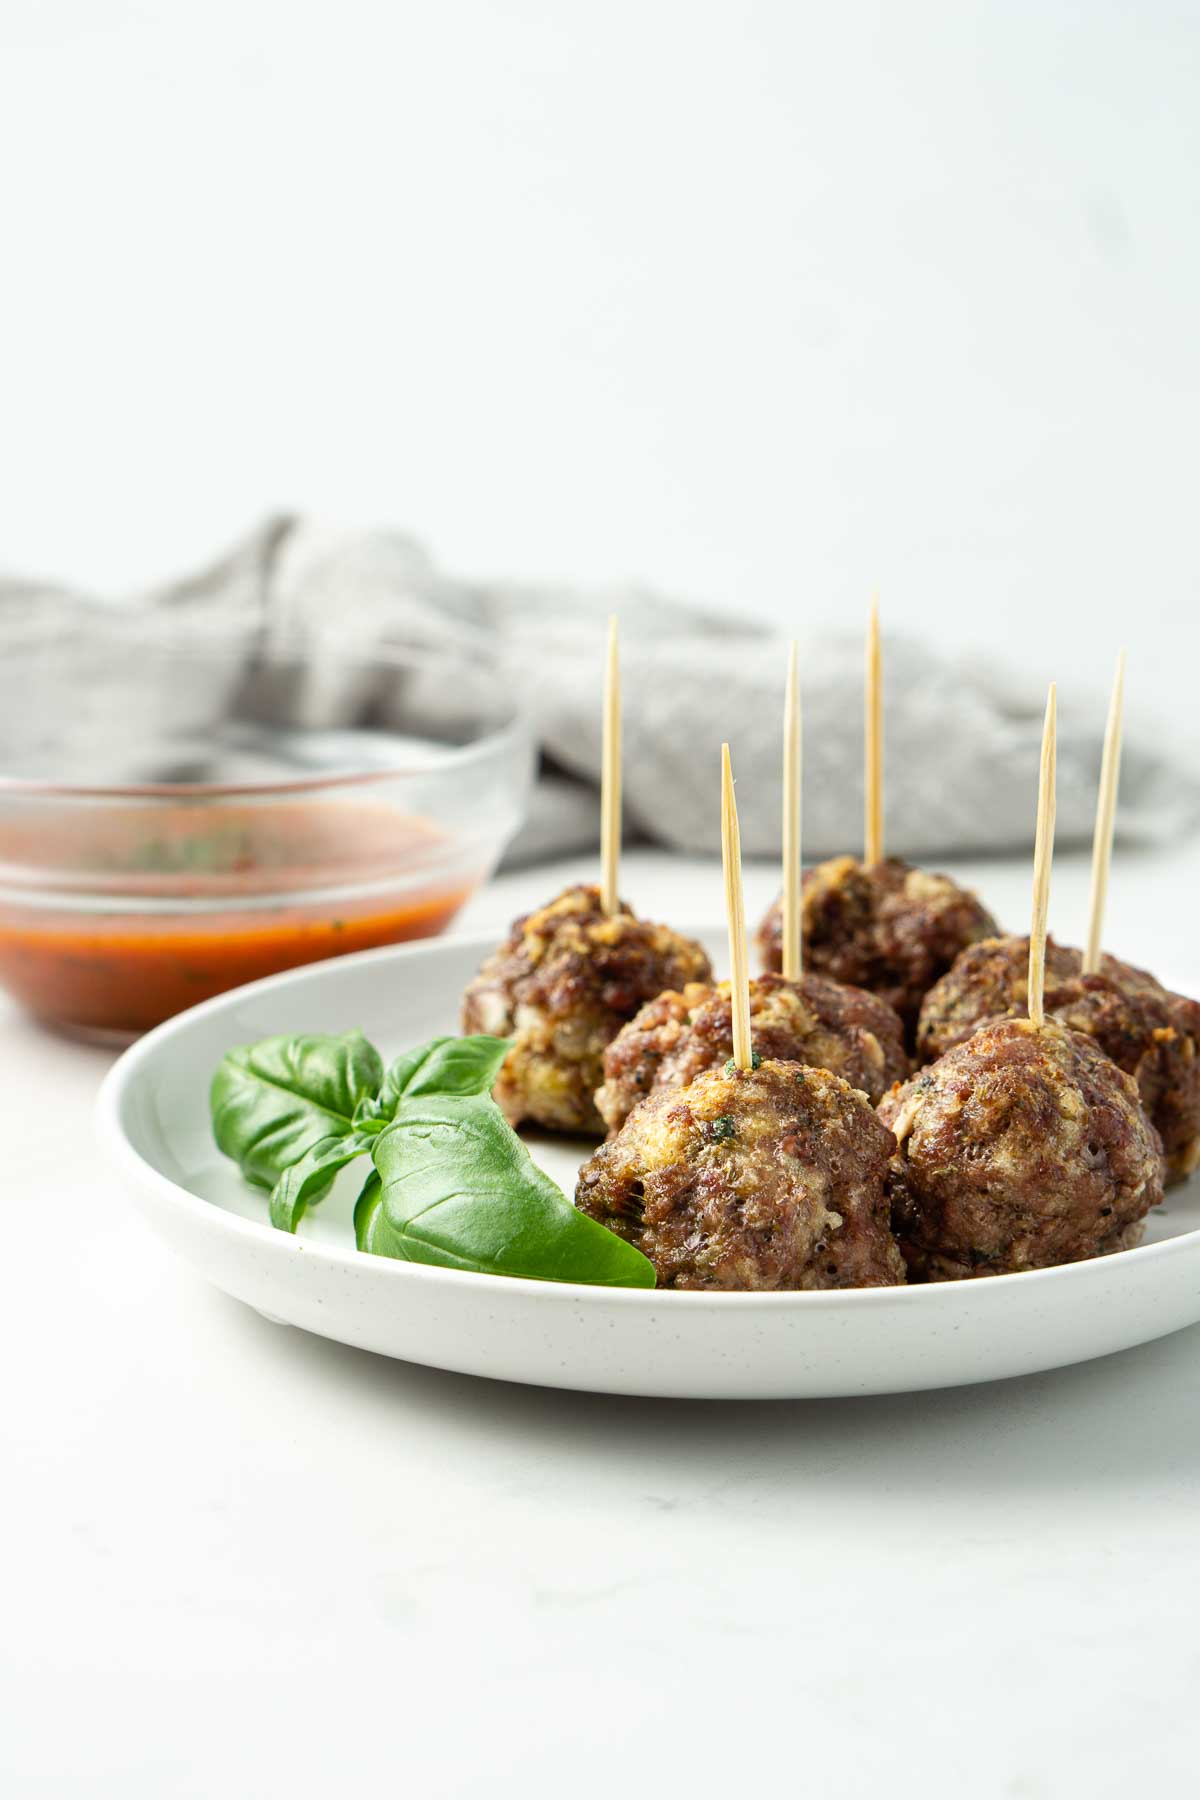 The Baking Tool I Use for Making Perfect Meatballs Every Time